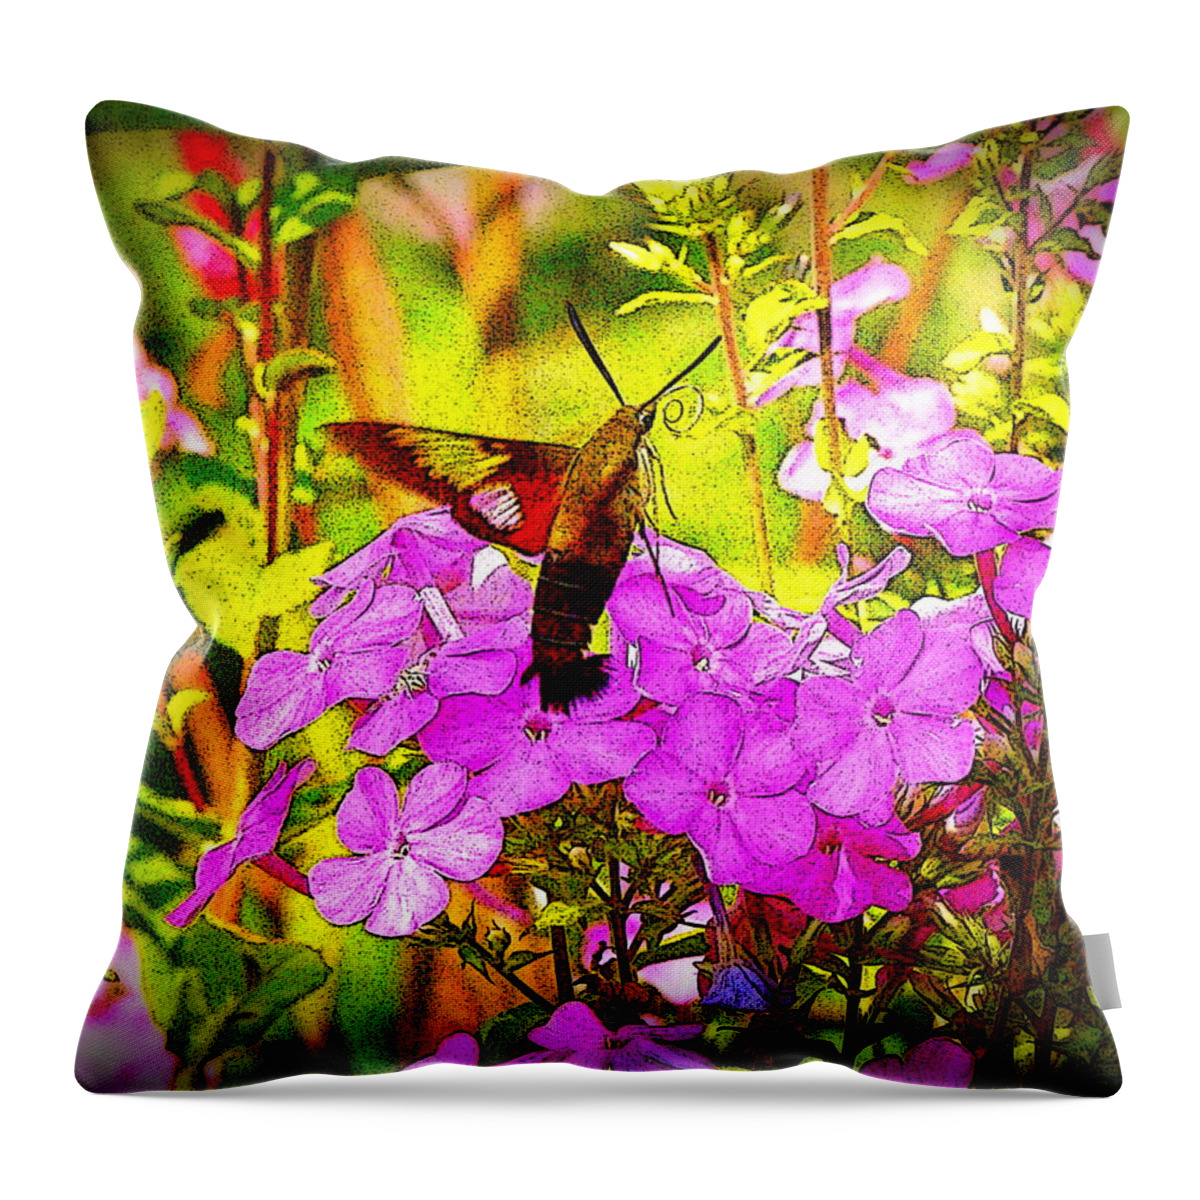 Fine Art Throw Pillow featuring the photograph Fantasy Garden by Rodney Lee Williams